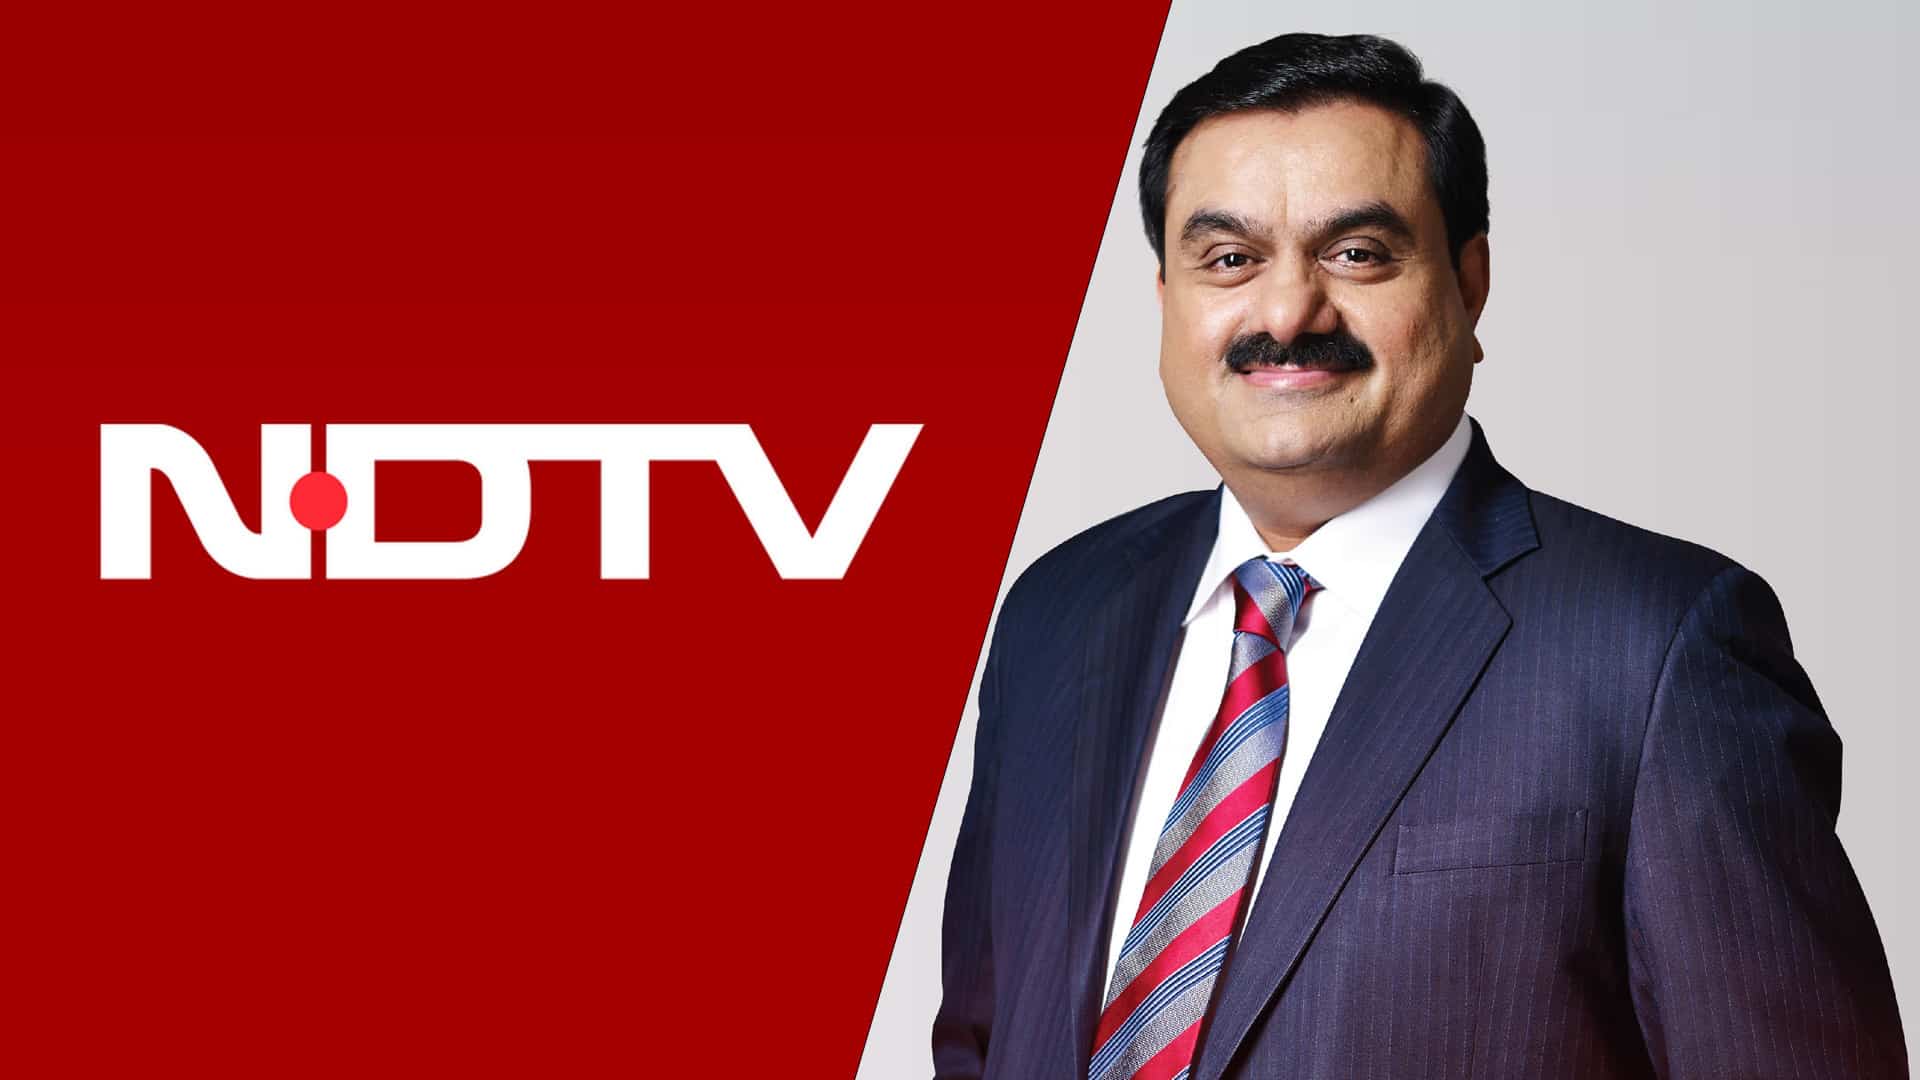 Adani takes control of NDTV, buys promoters' stake at 17 pc premium to open offer price, Roys resign